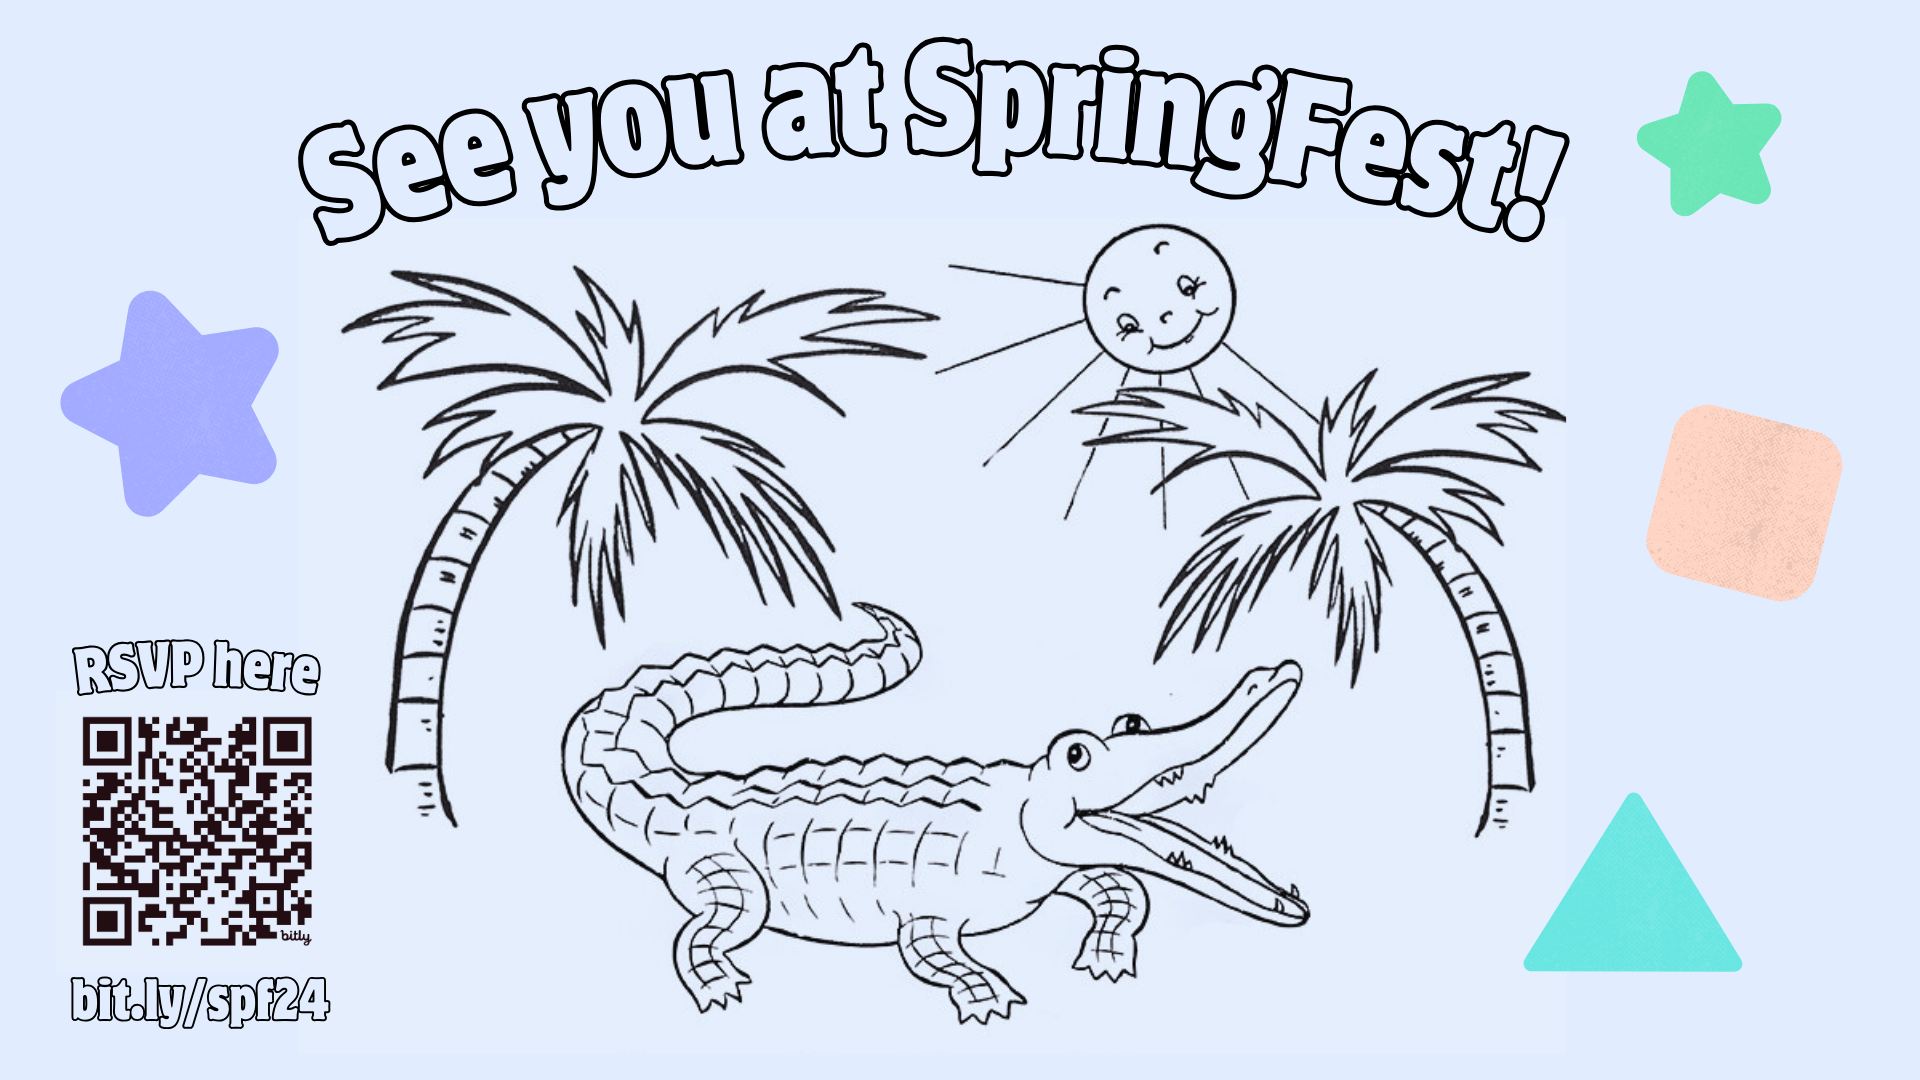 A vintage-style illustrated gator with its mouth open, standing between two palm trees.